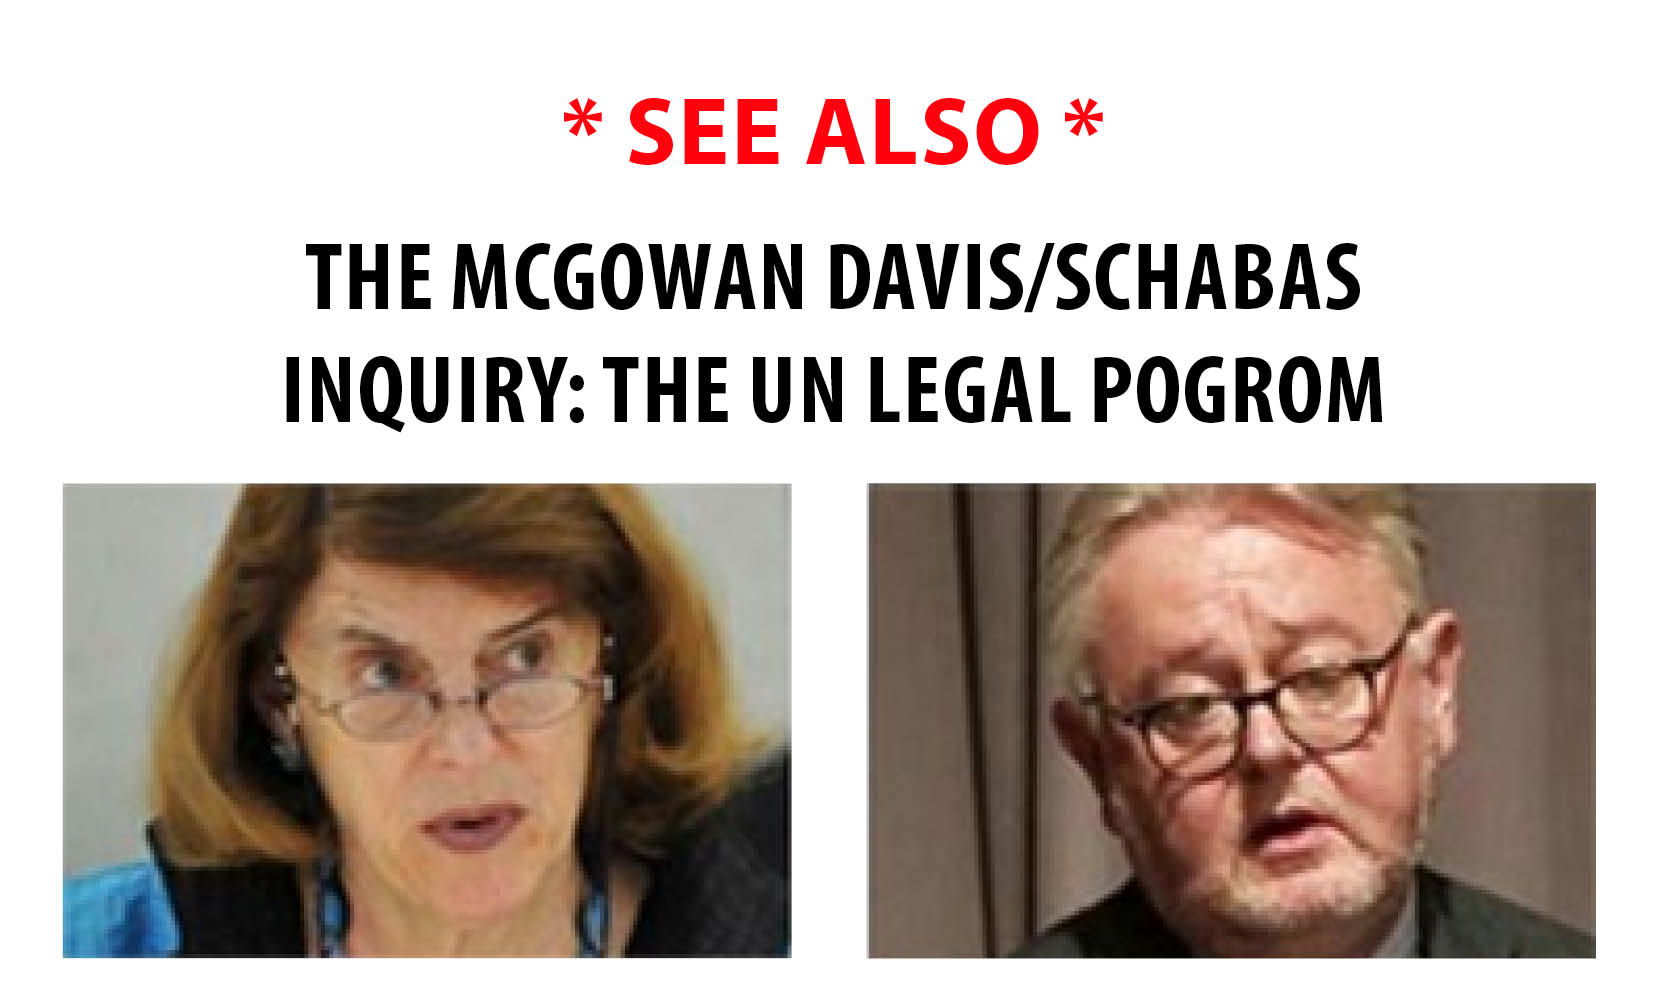 See also: The McGowan Davis / Schabas Inquiry: The UN Legal Pogrom